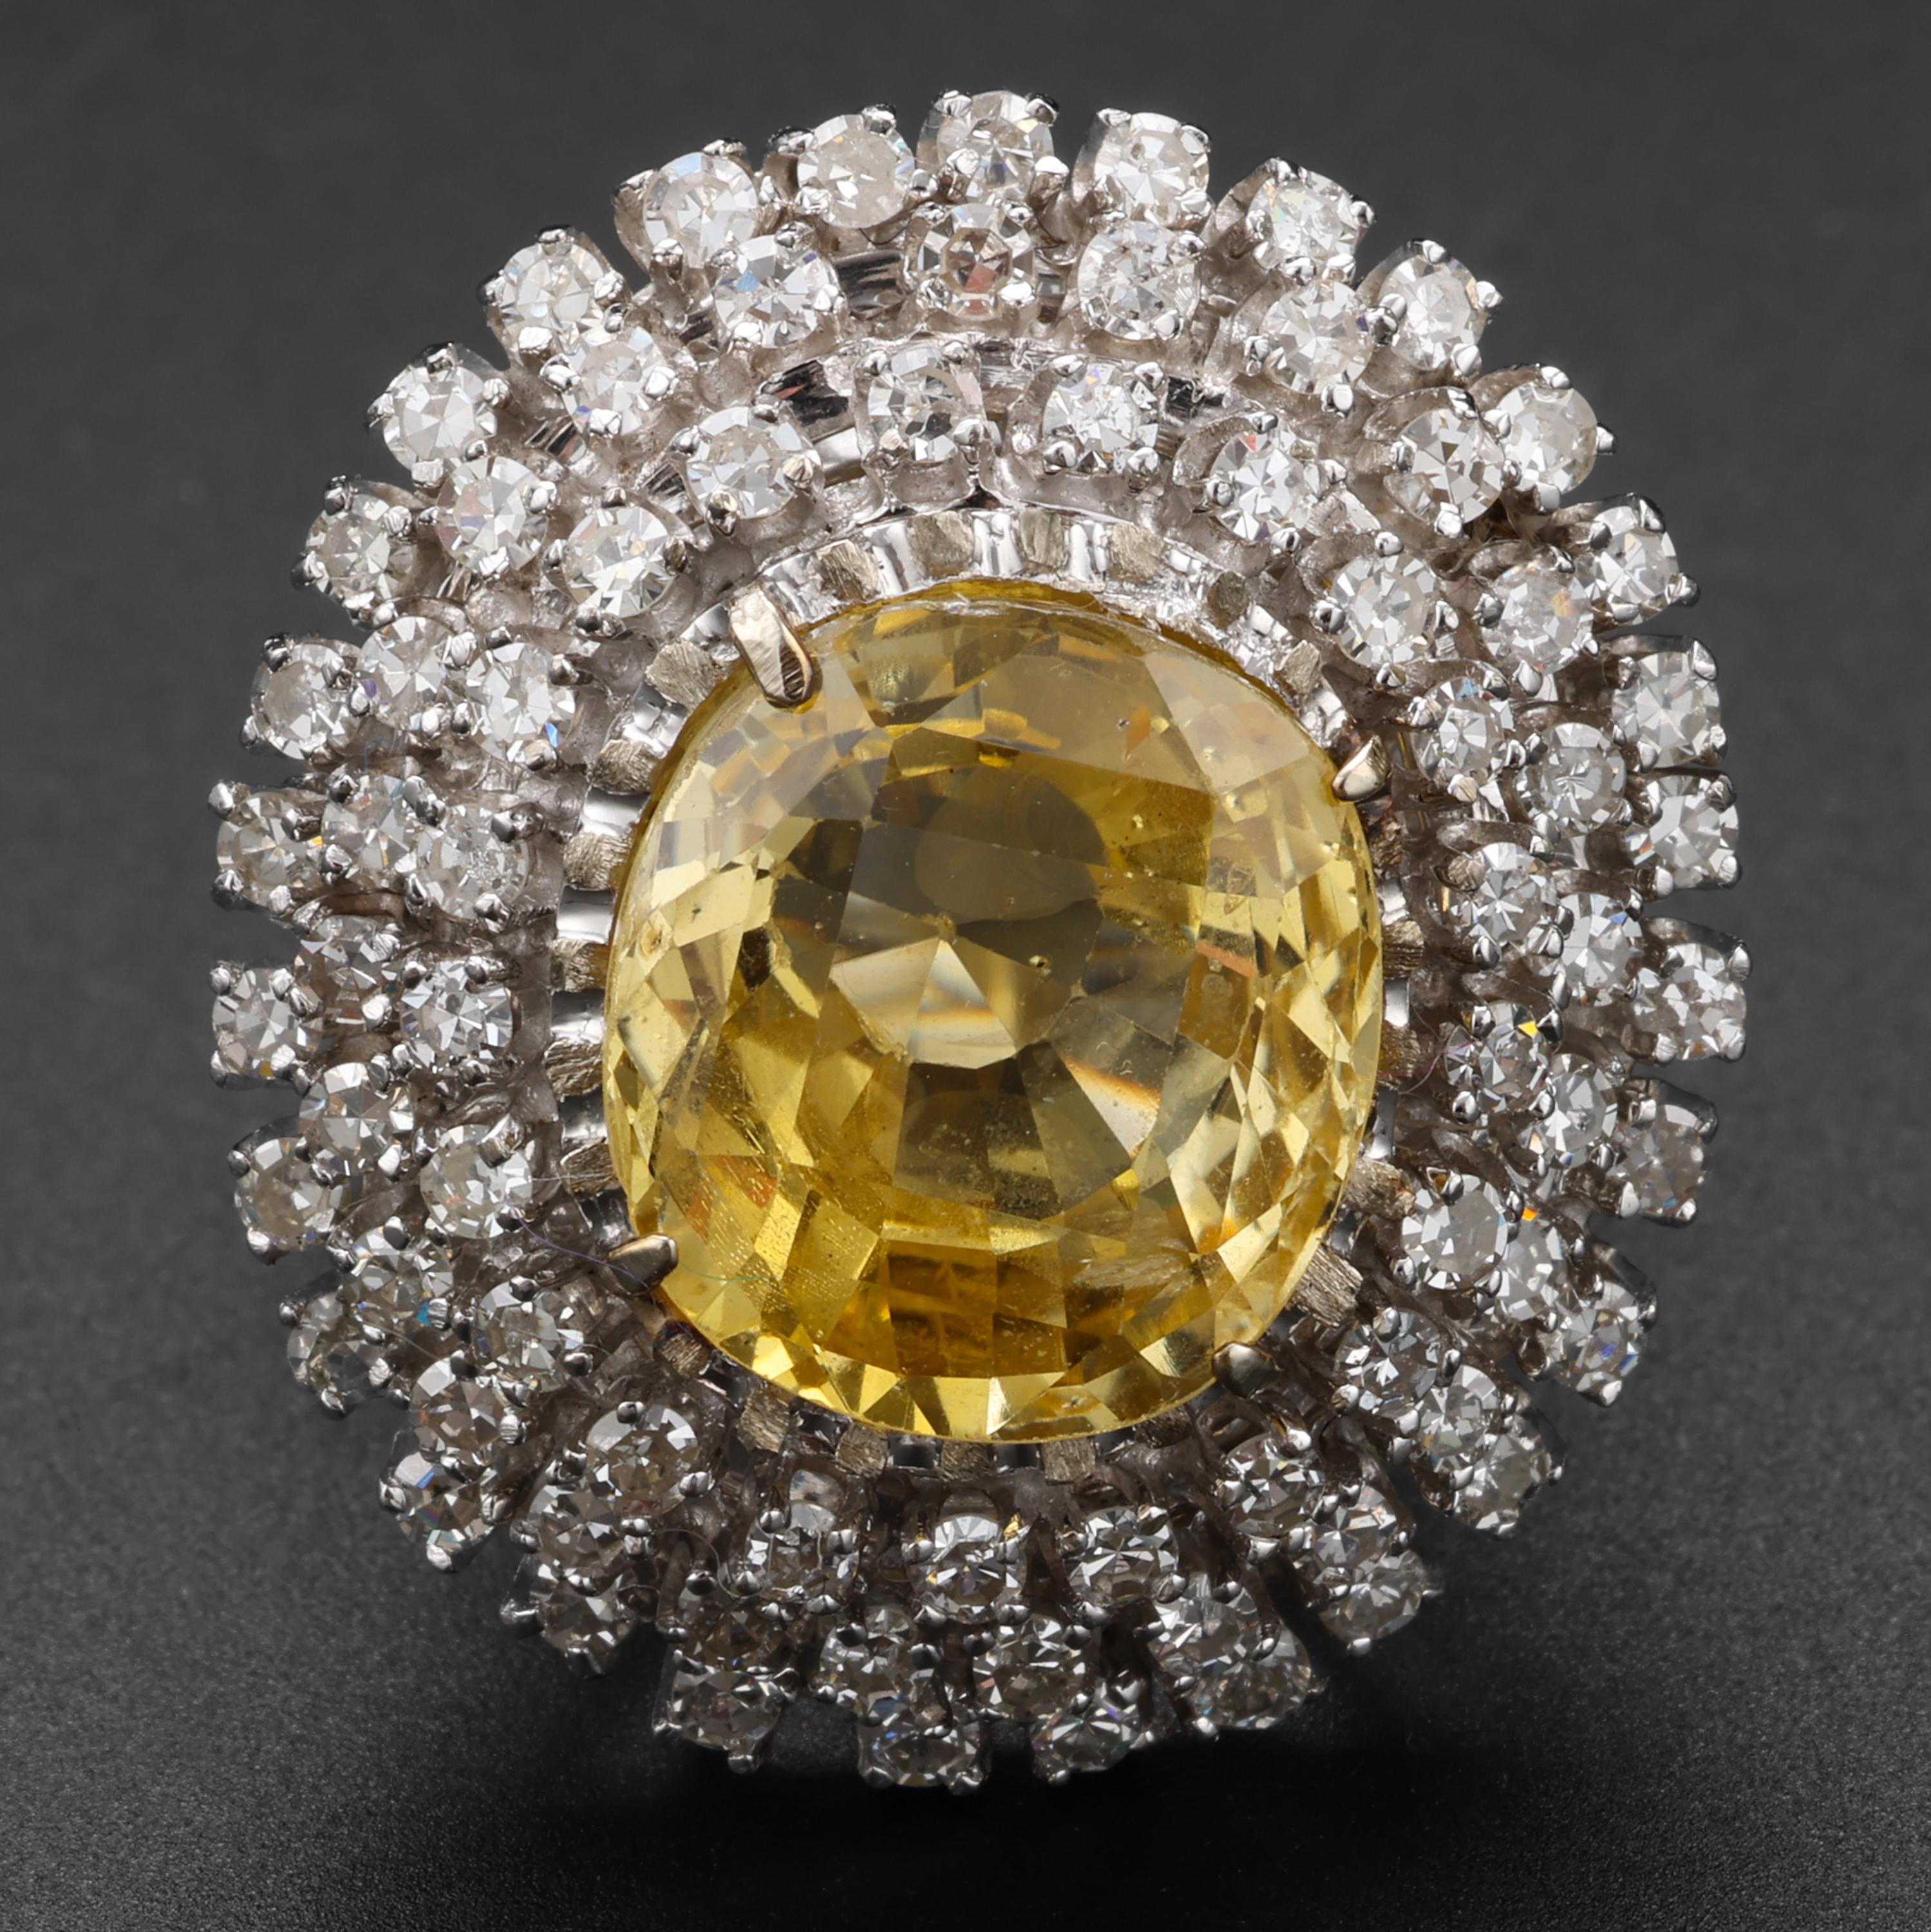 An absolutely gorgeous bright, canary yellow sapphire weighing 12.5 carats is surrounded by three halos of firey diamonds for a Retro ring that is hypnotically beautiful. The 75 eye-clean, white diamonds weigh approximately 1.5 carats in total.

The